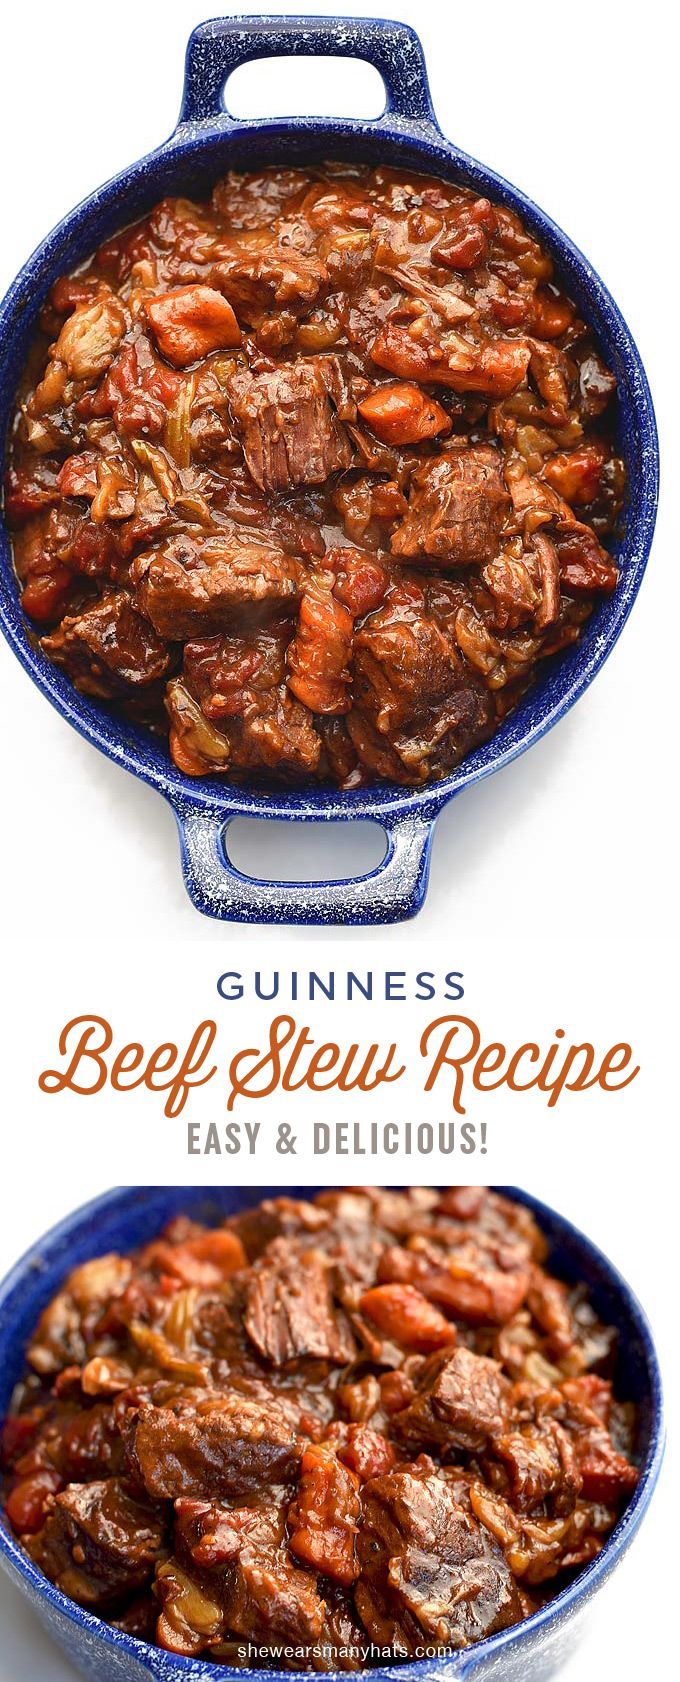 This Guinness Beef Stew Recipe makes a hearty meal that is the perfect comfort food for a cold night.